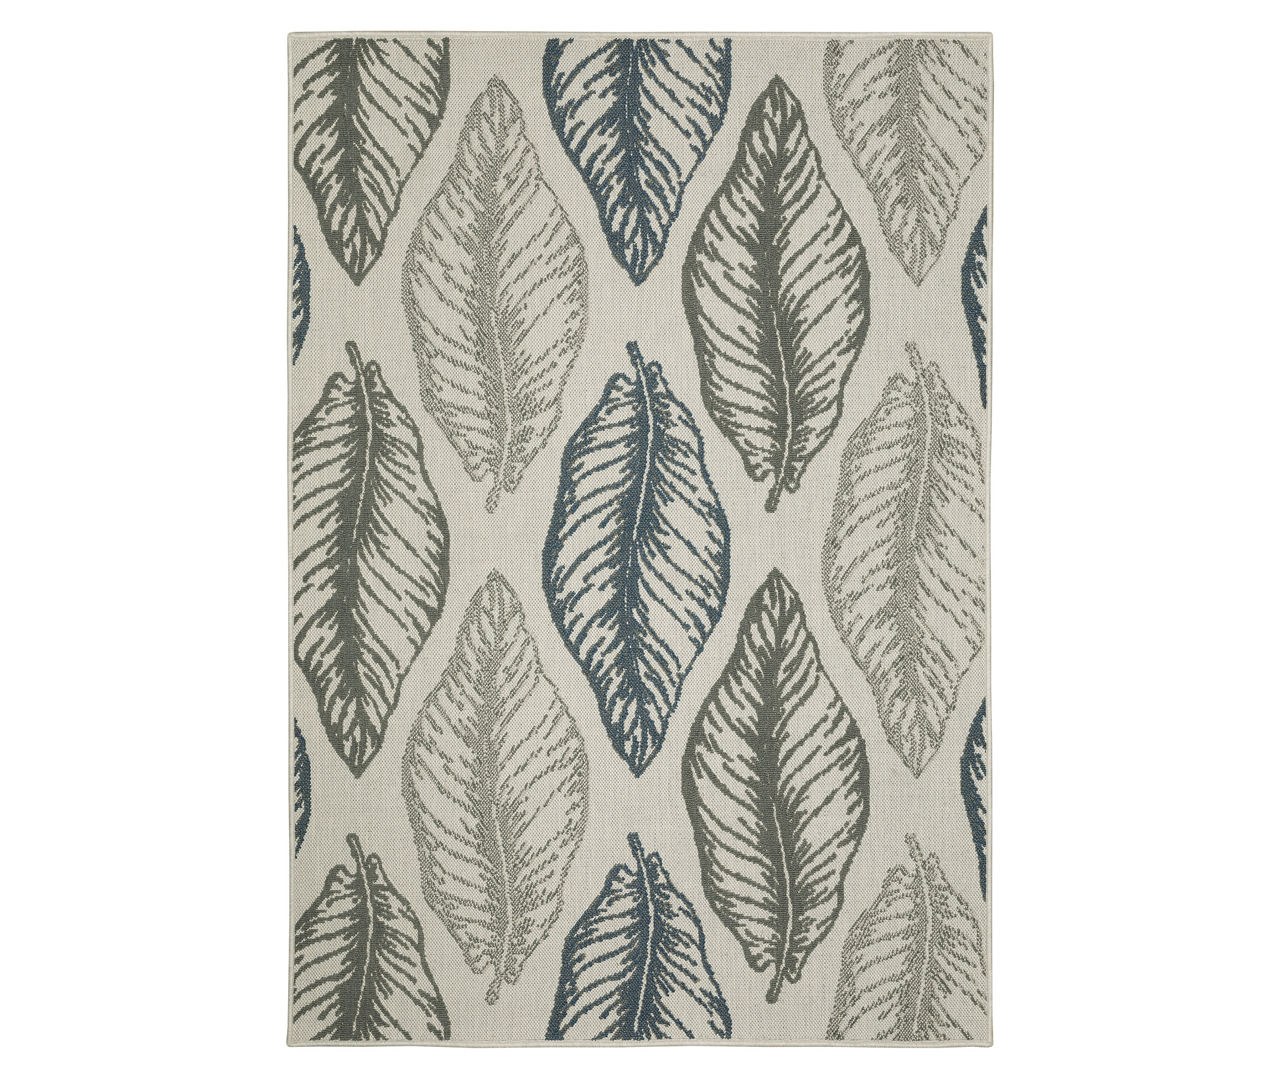 Torian Beige, Green & Blue Leaves Outdoor Area Rug, (6.7' x 9.2')